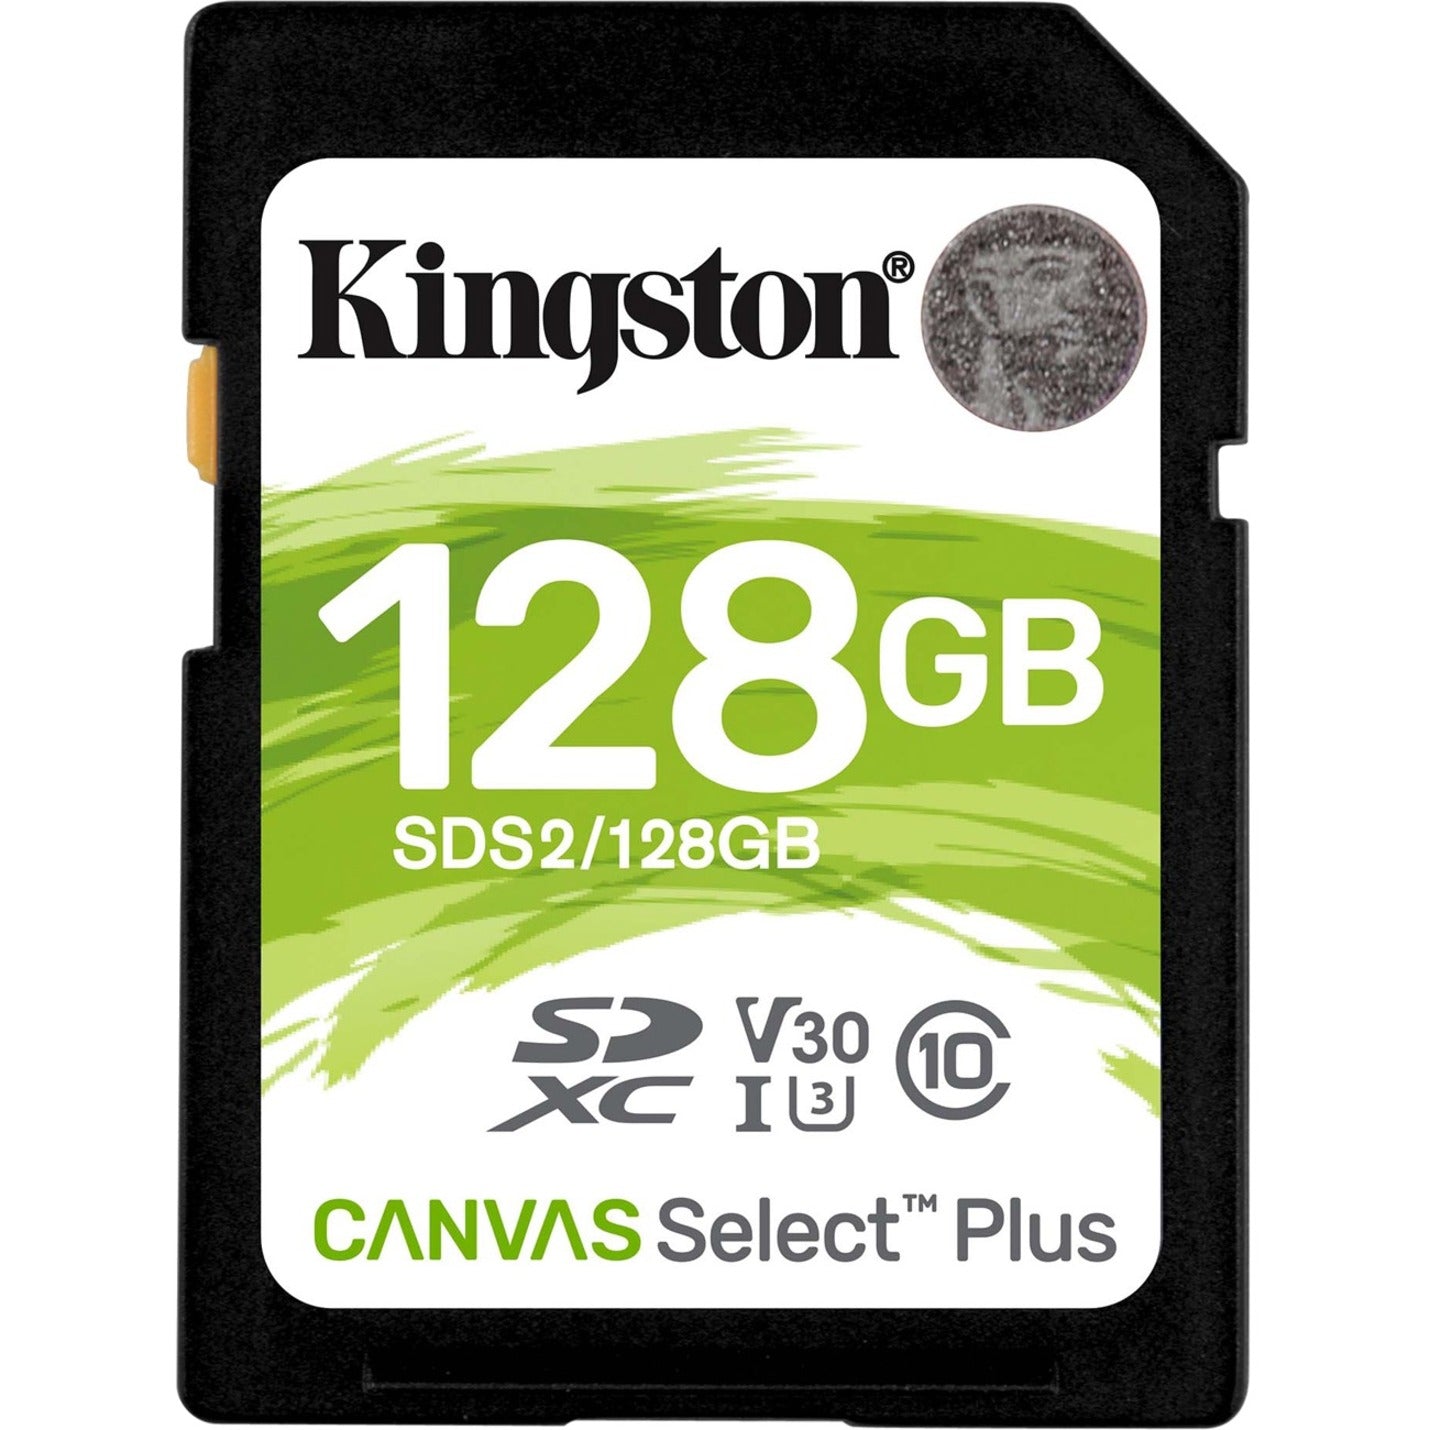 Kingston SDS2/128GB Canvas Select Plus SD Card For HD 1080p And 4K Video Cameras, 128GB Storage Capacity, Class 10/UHS-I (U3), 100MB/s Read Speed